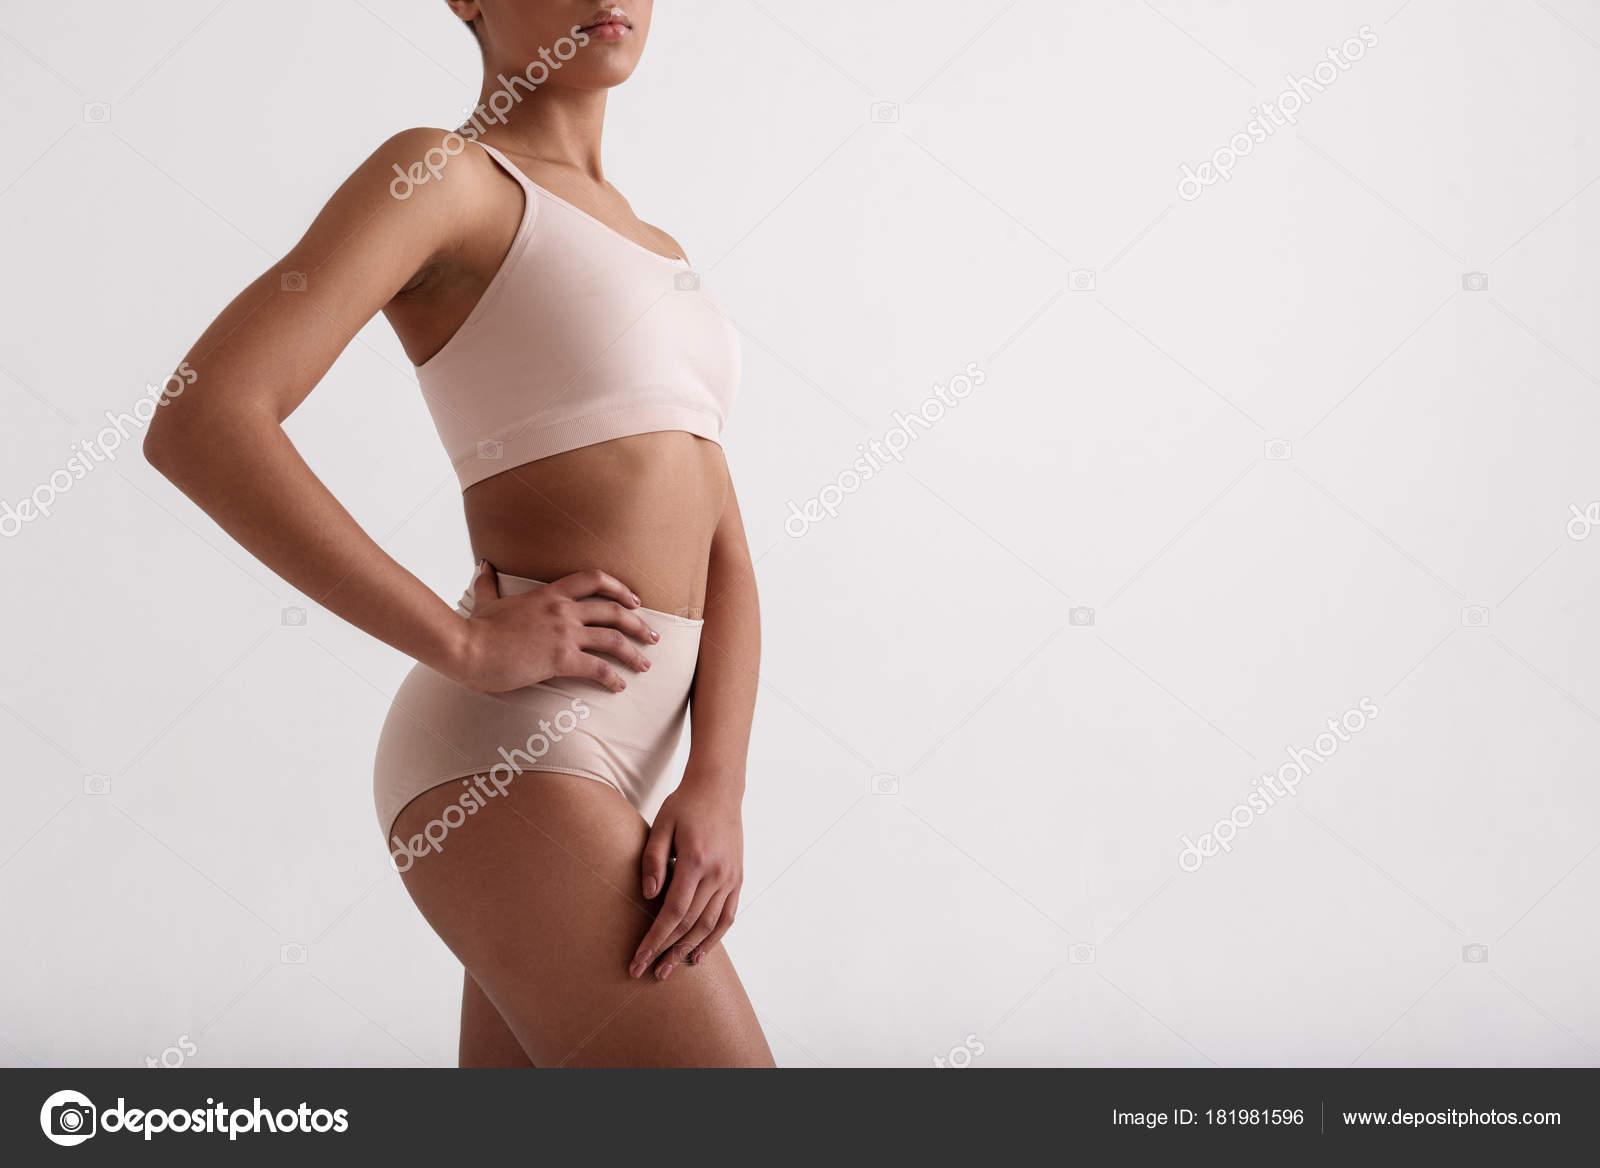 Skinny lady posturing in tight underwear Stock Photo by